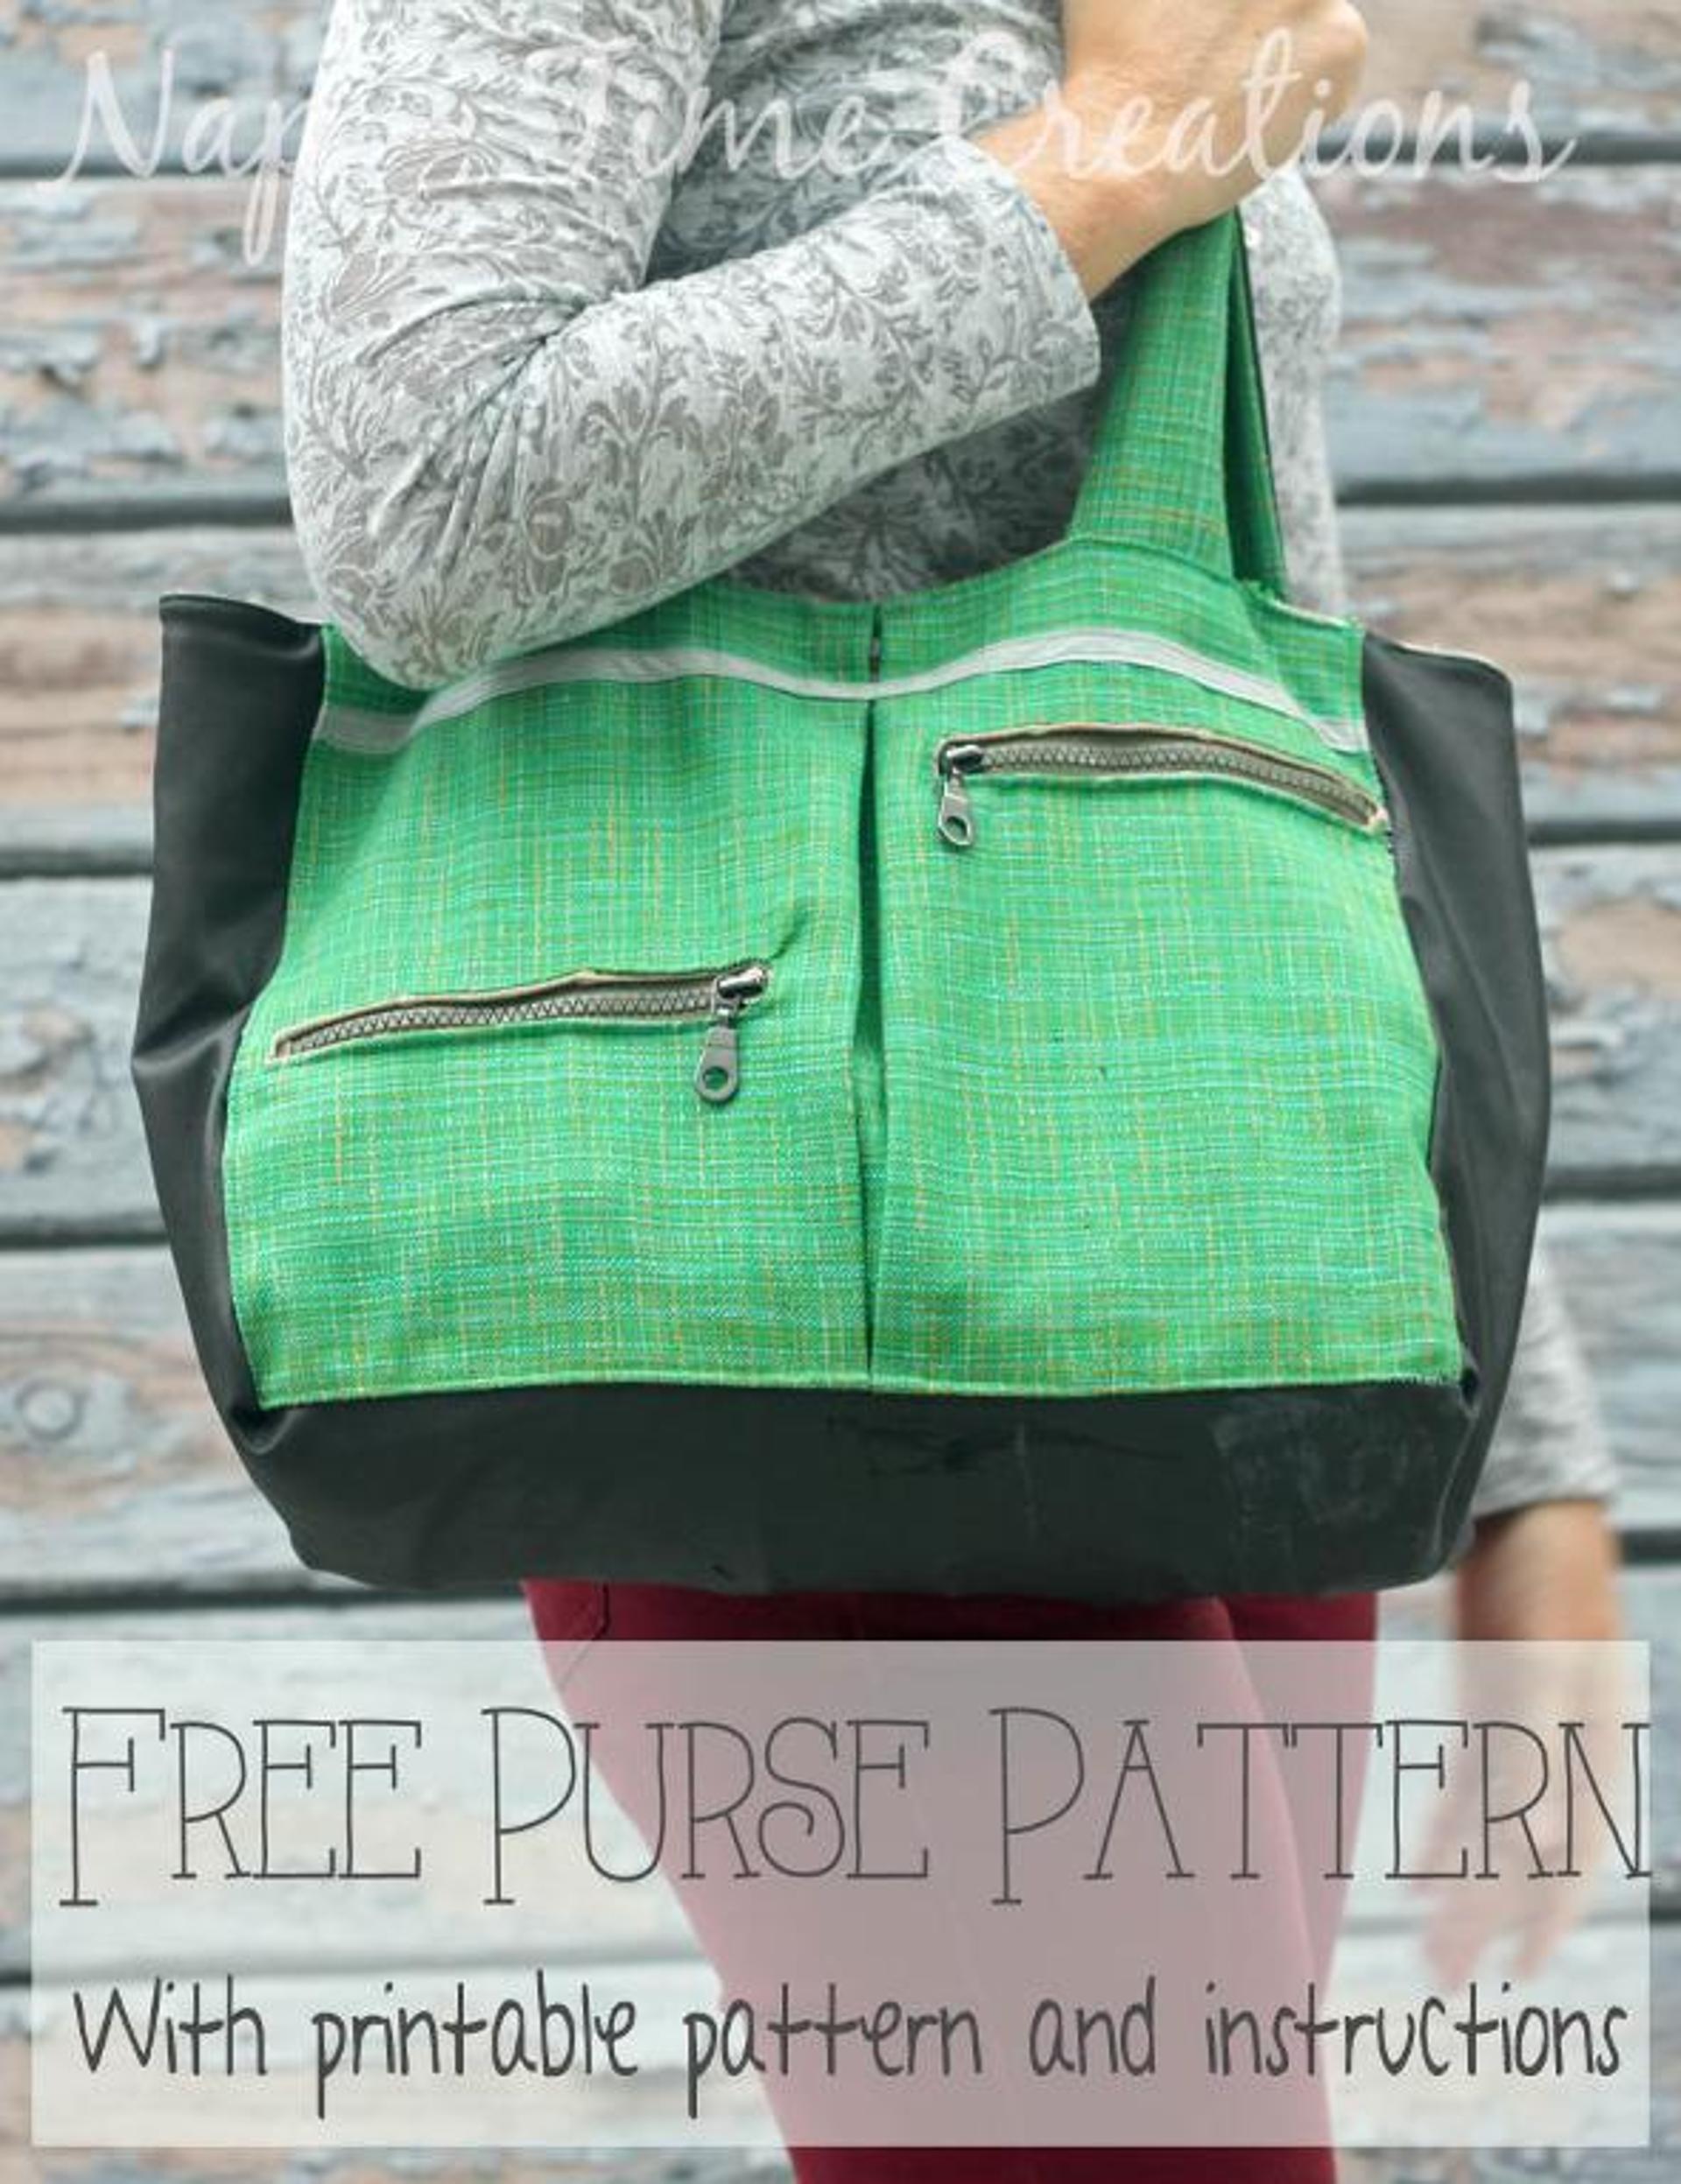 🎁 Get Crafty with This Free Pattern for a DIY Little Girls Purse! - YouTube